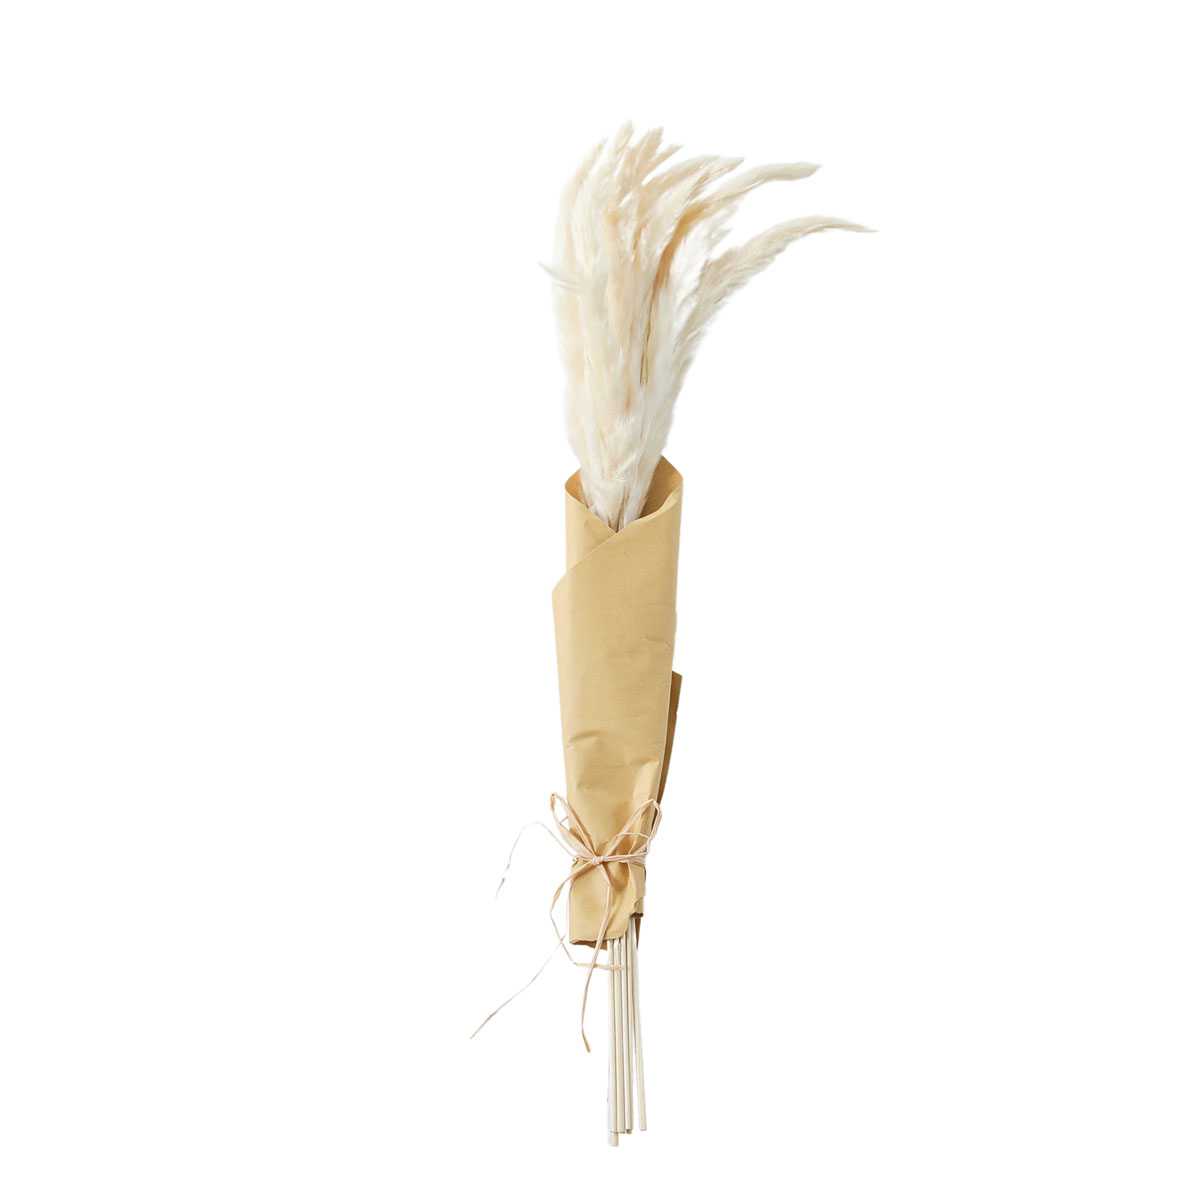 Dried Reed Grass Bundle in Paper Wrap White H600mm